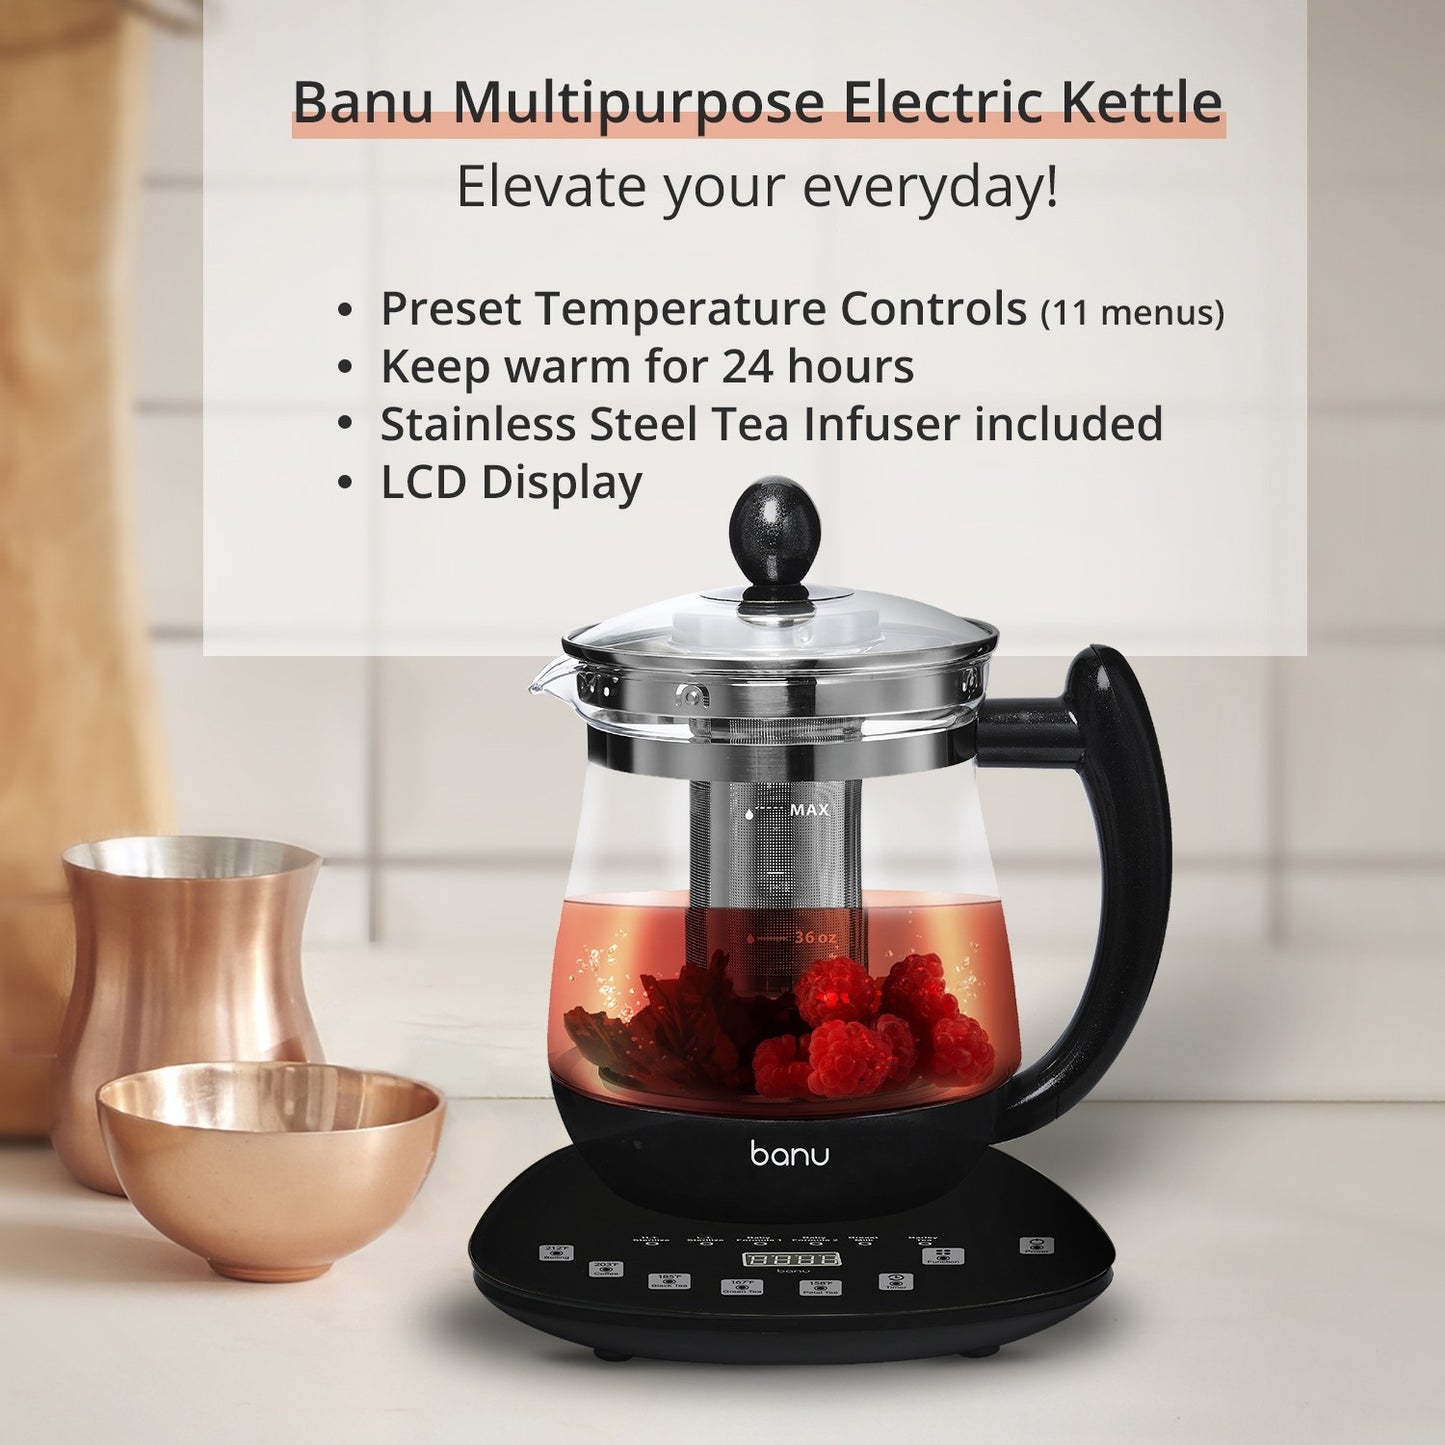 [BANU] Smart Teapot Electric Tea Kettle 1.8L Glass Teapot with One Touch